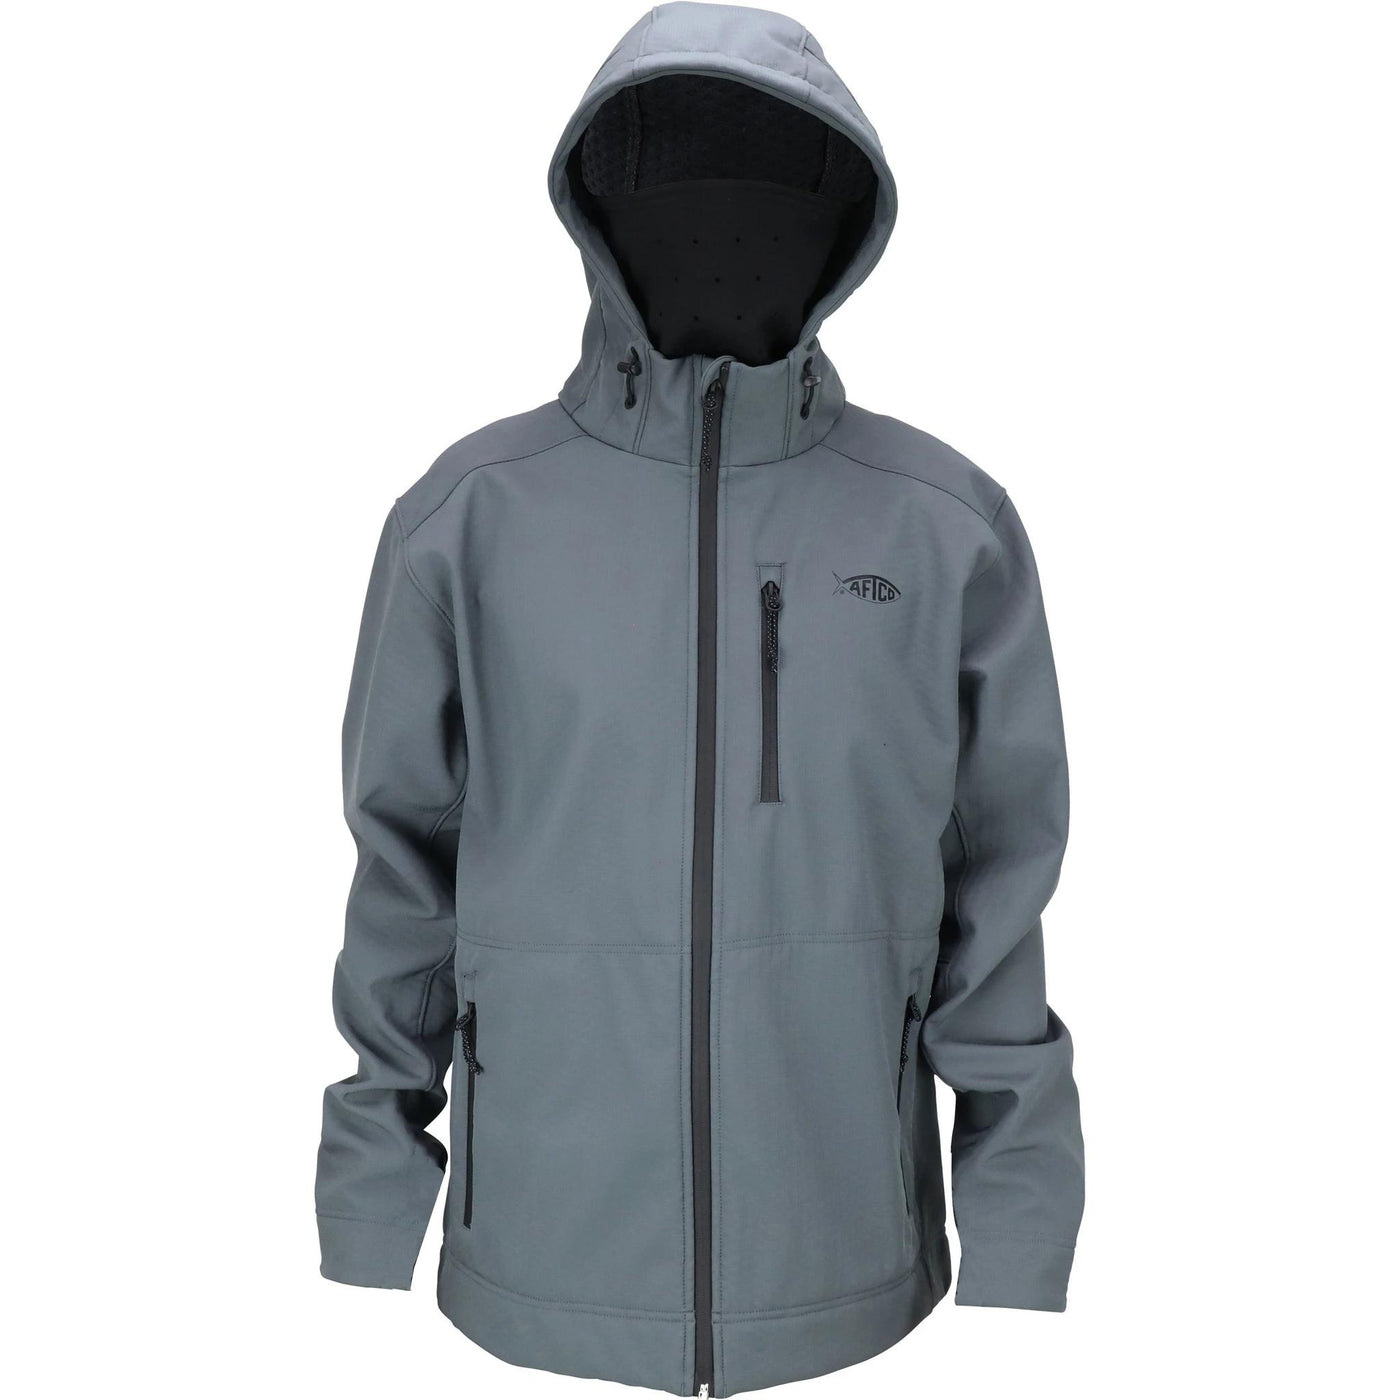 Aftco Reaper Windproof Zip Up Jacket-MENS CLOTHING-Kevin's Fine Outdoor Gear & Apparel